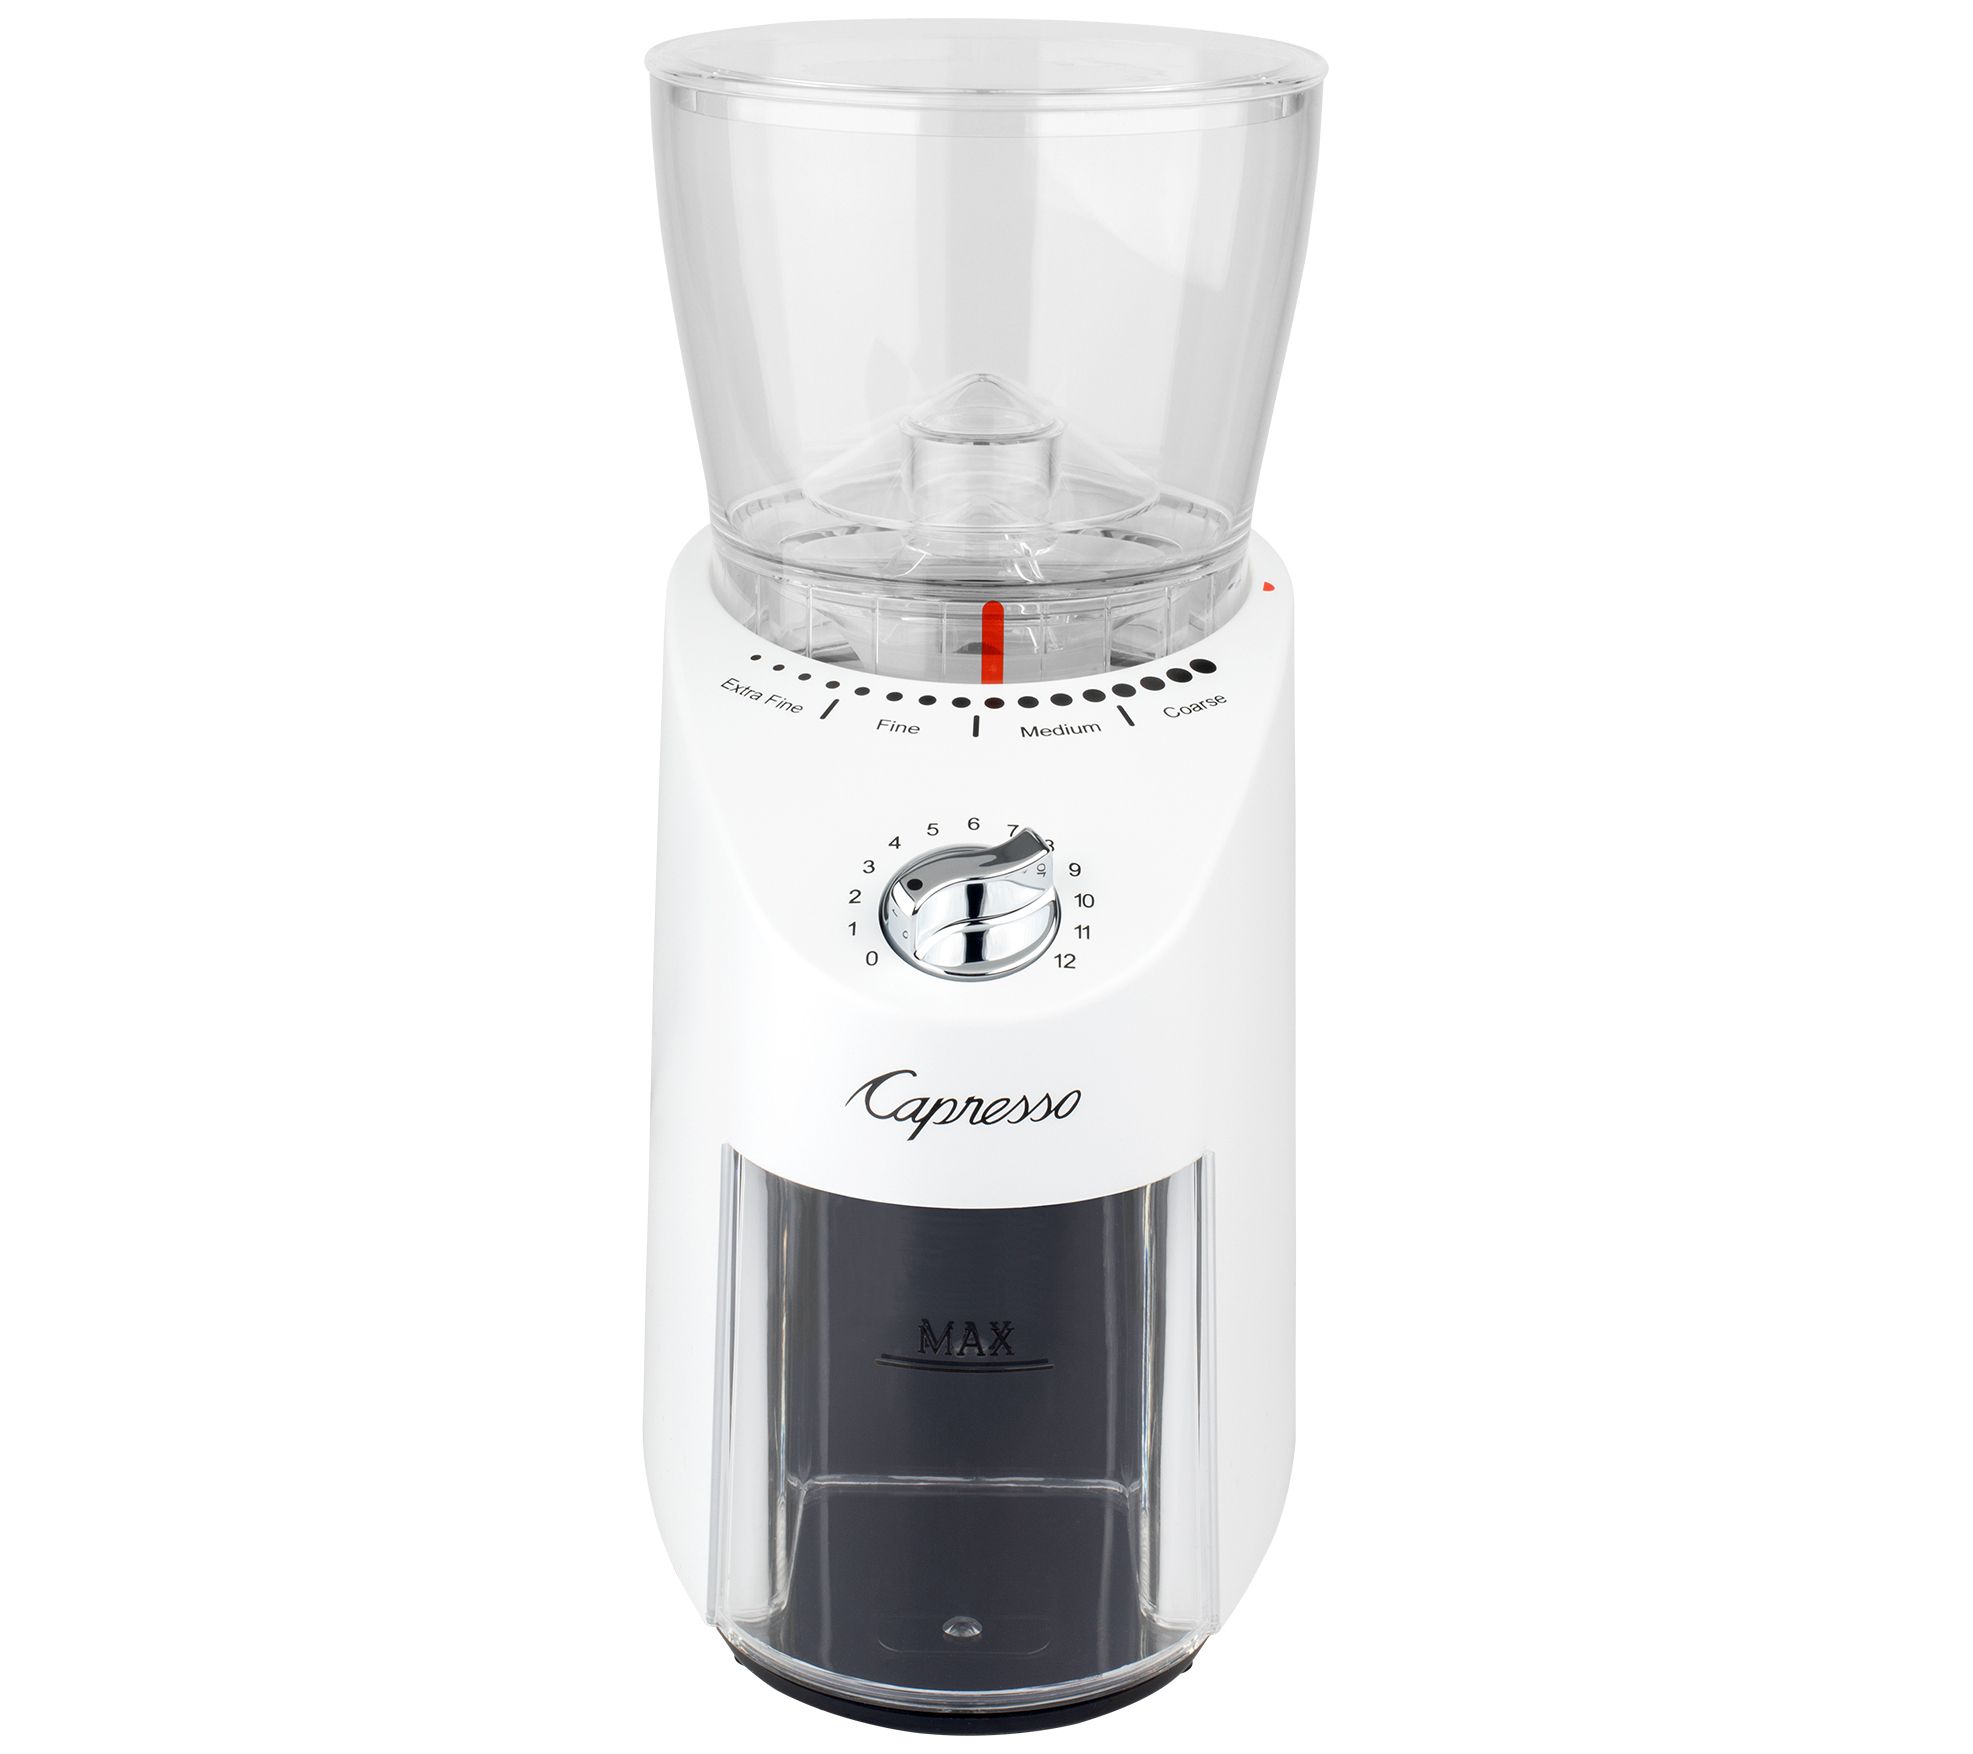  OXO On Barista Brain 9 Cup Coffee Maker and Conical Burr Coffee  Grinder Bundle: Home & Kitchen